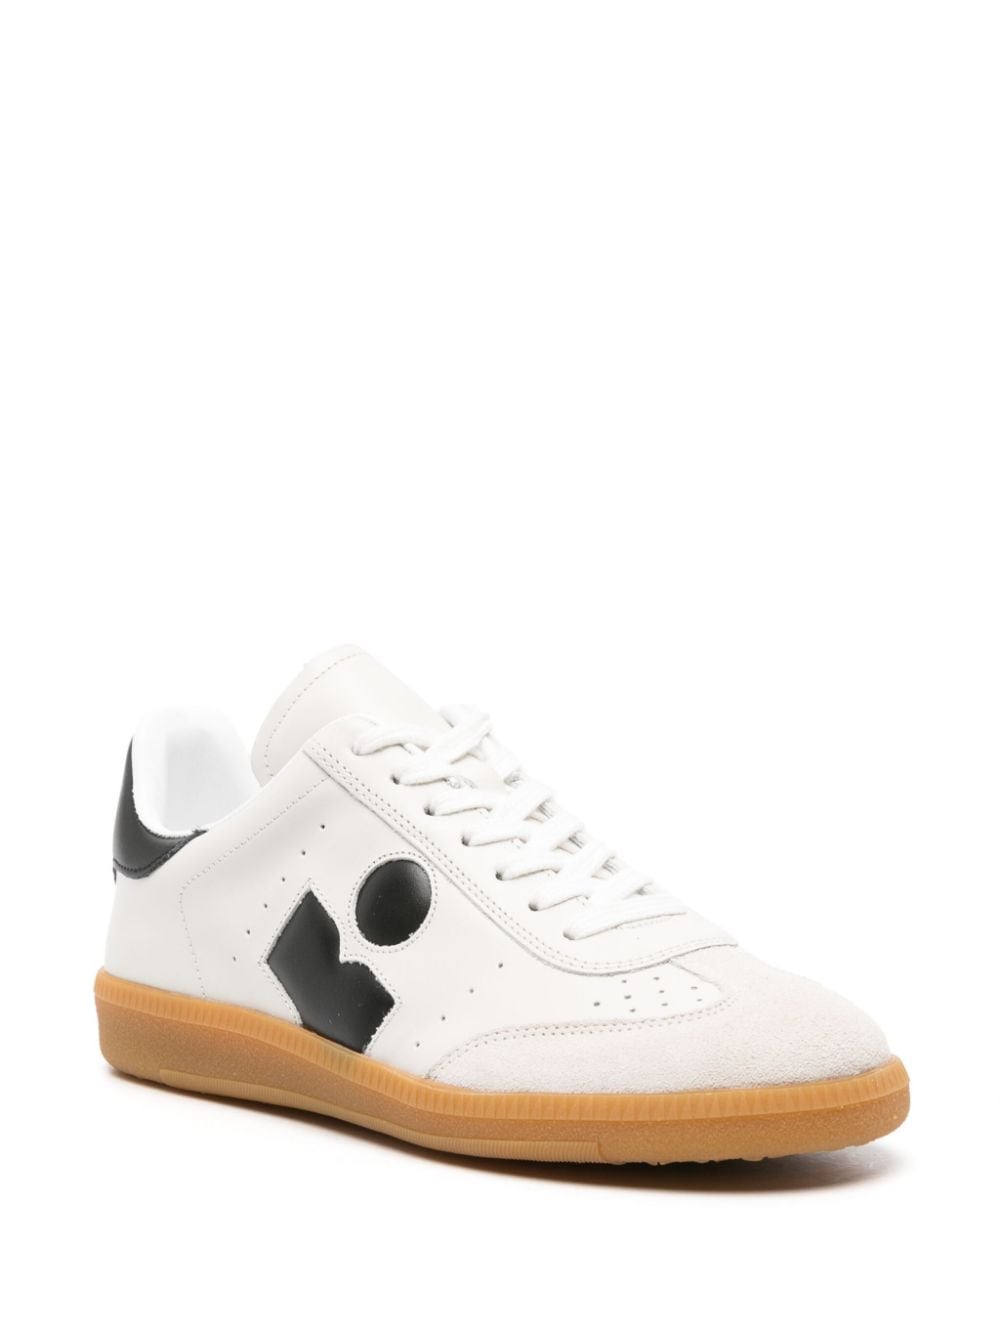 Isabel Marant ISABEL MARANT- Bryce Leather Sneakers